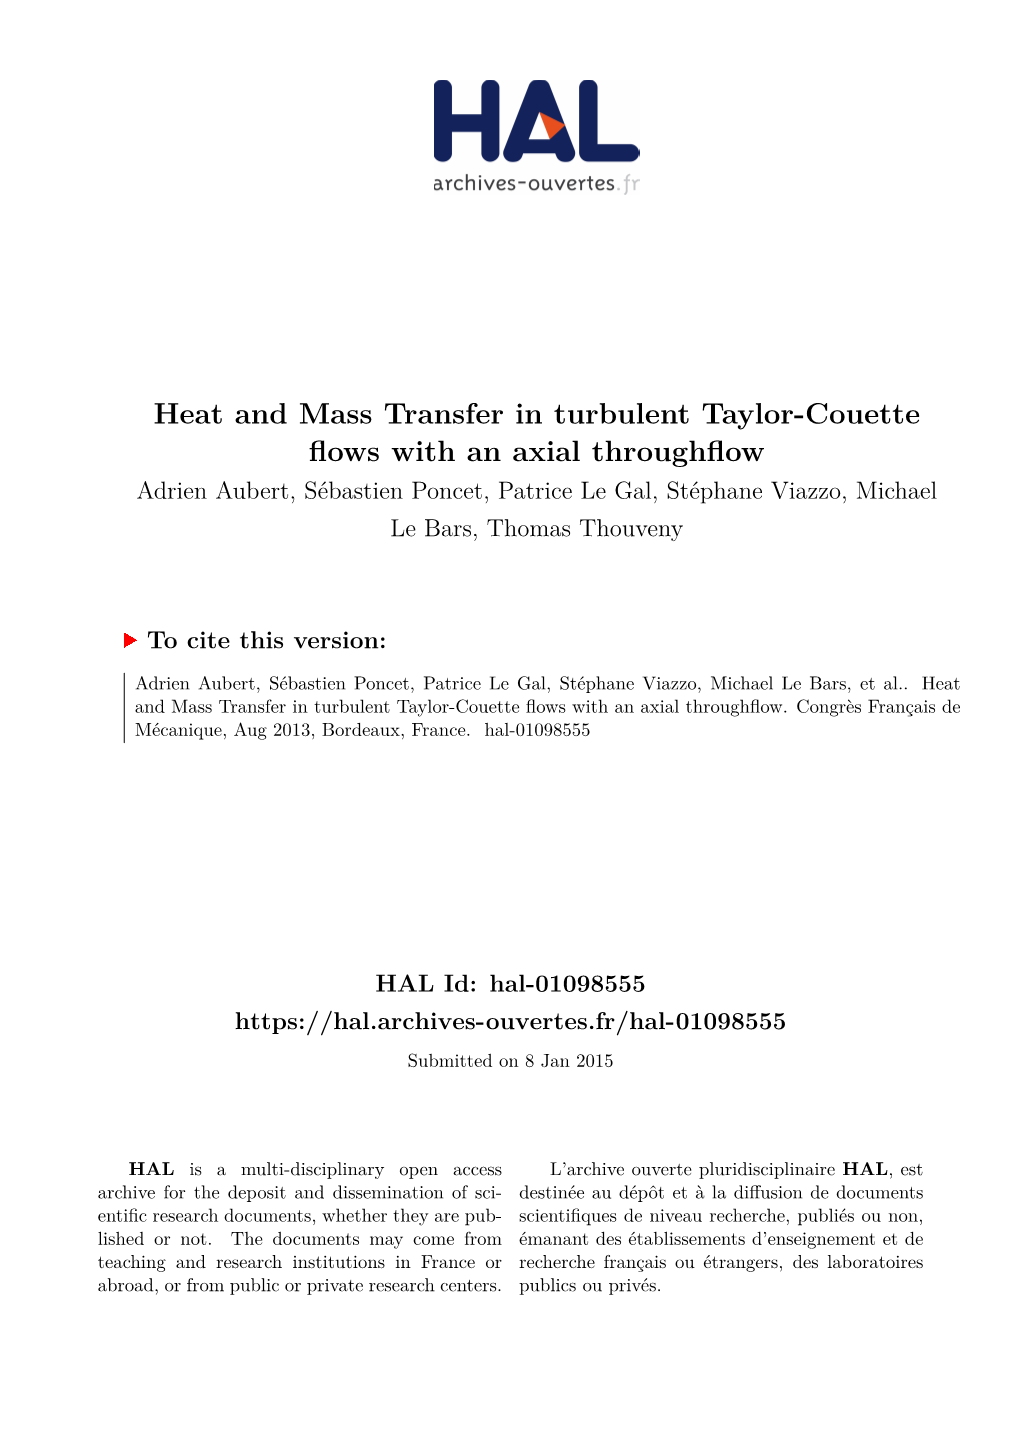 Heat and Mass Transfer in Turbulent Taylor-Couette Flows with an Axial